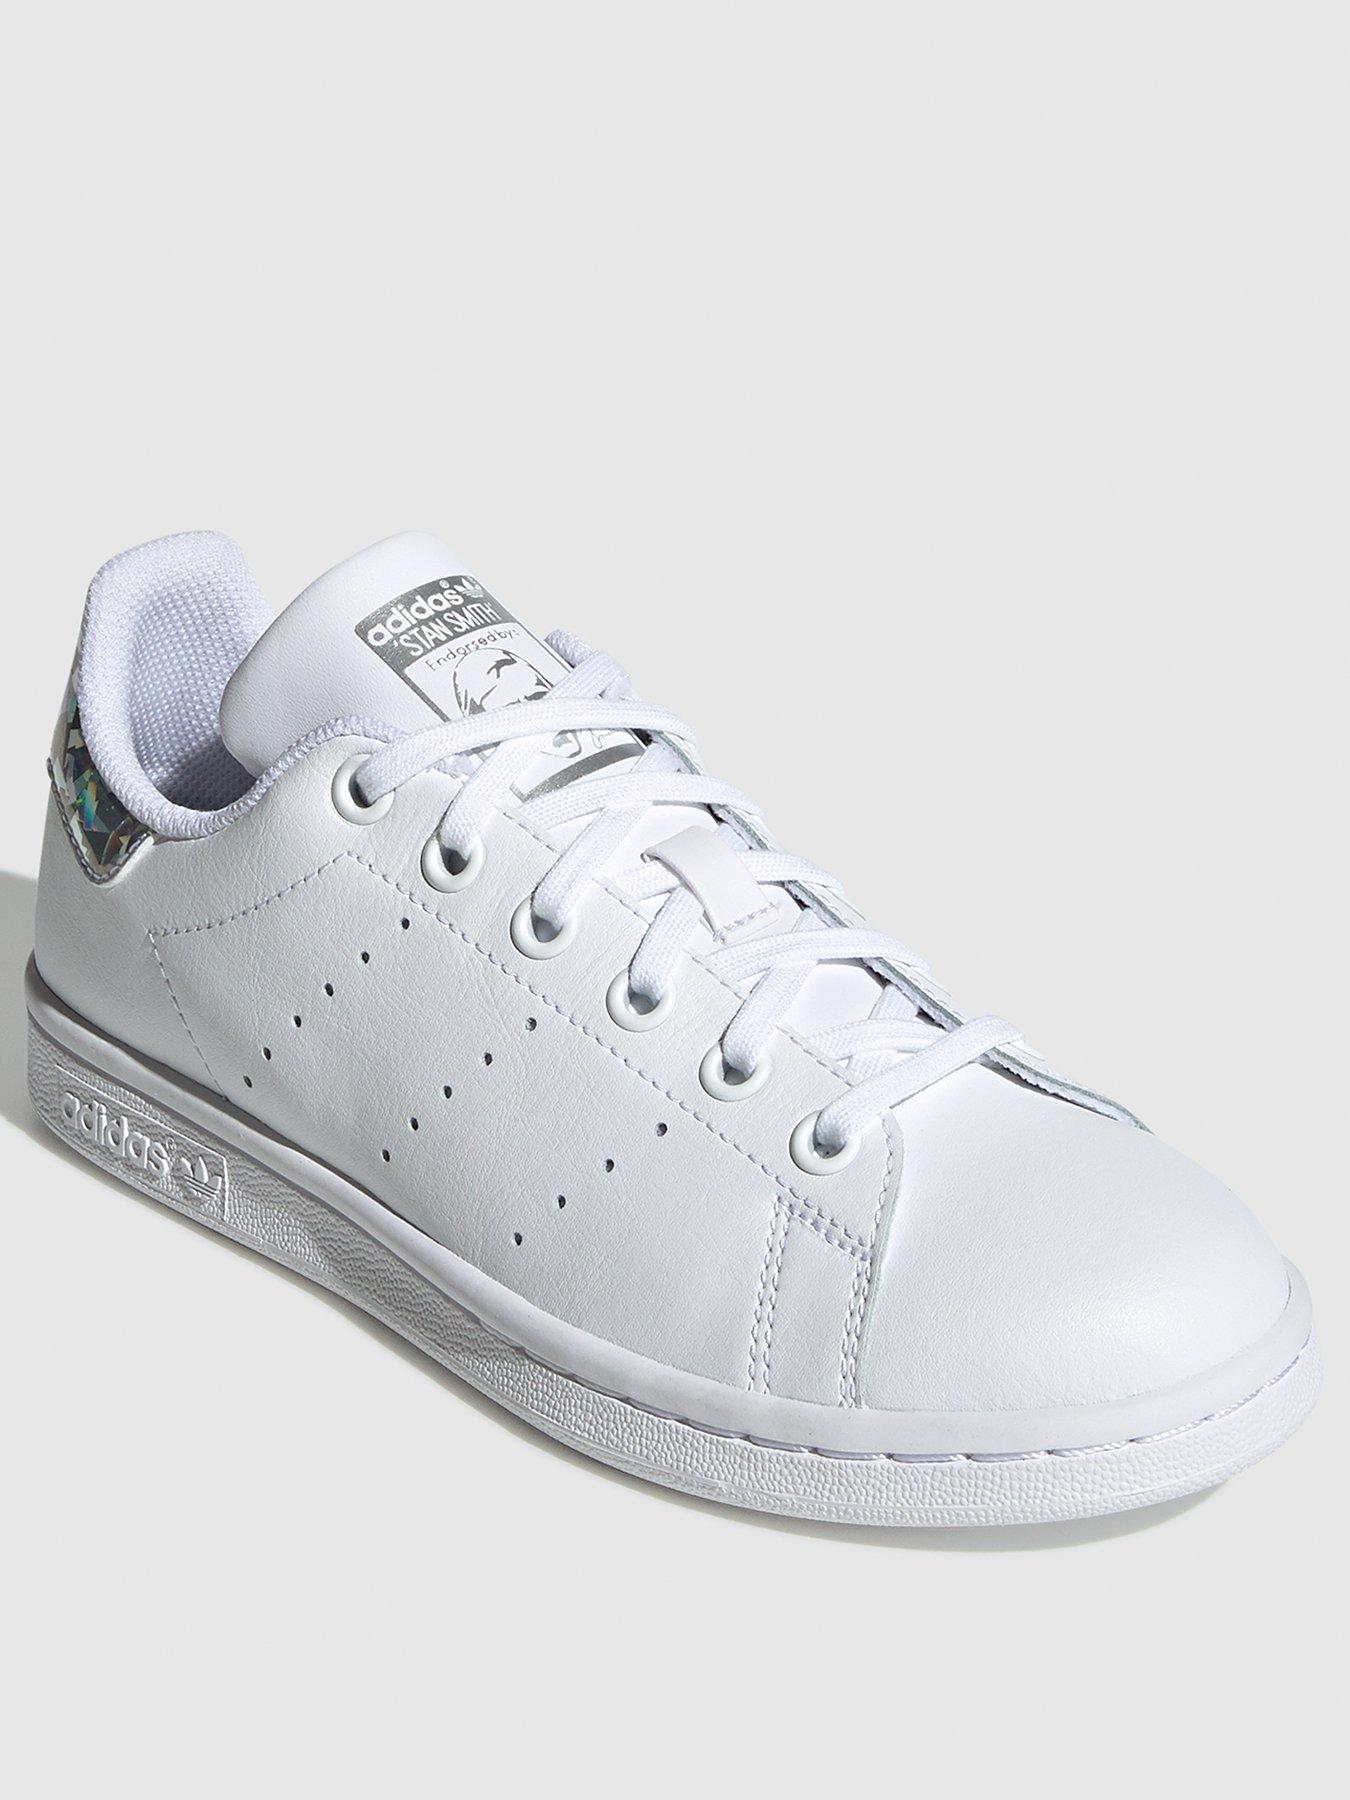 stan smith trainers size 6